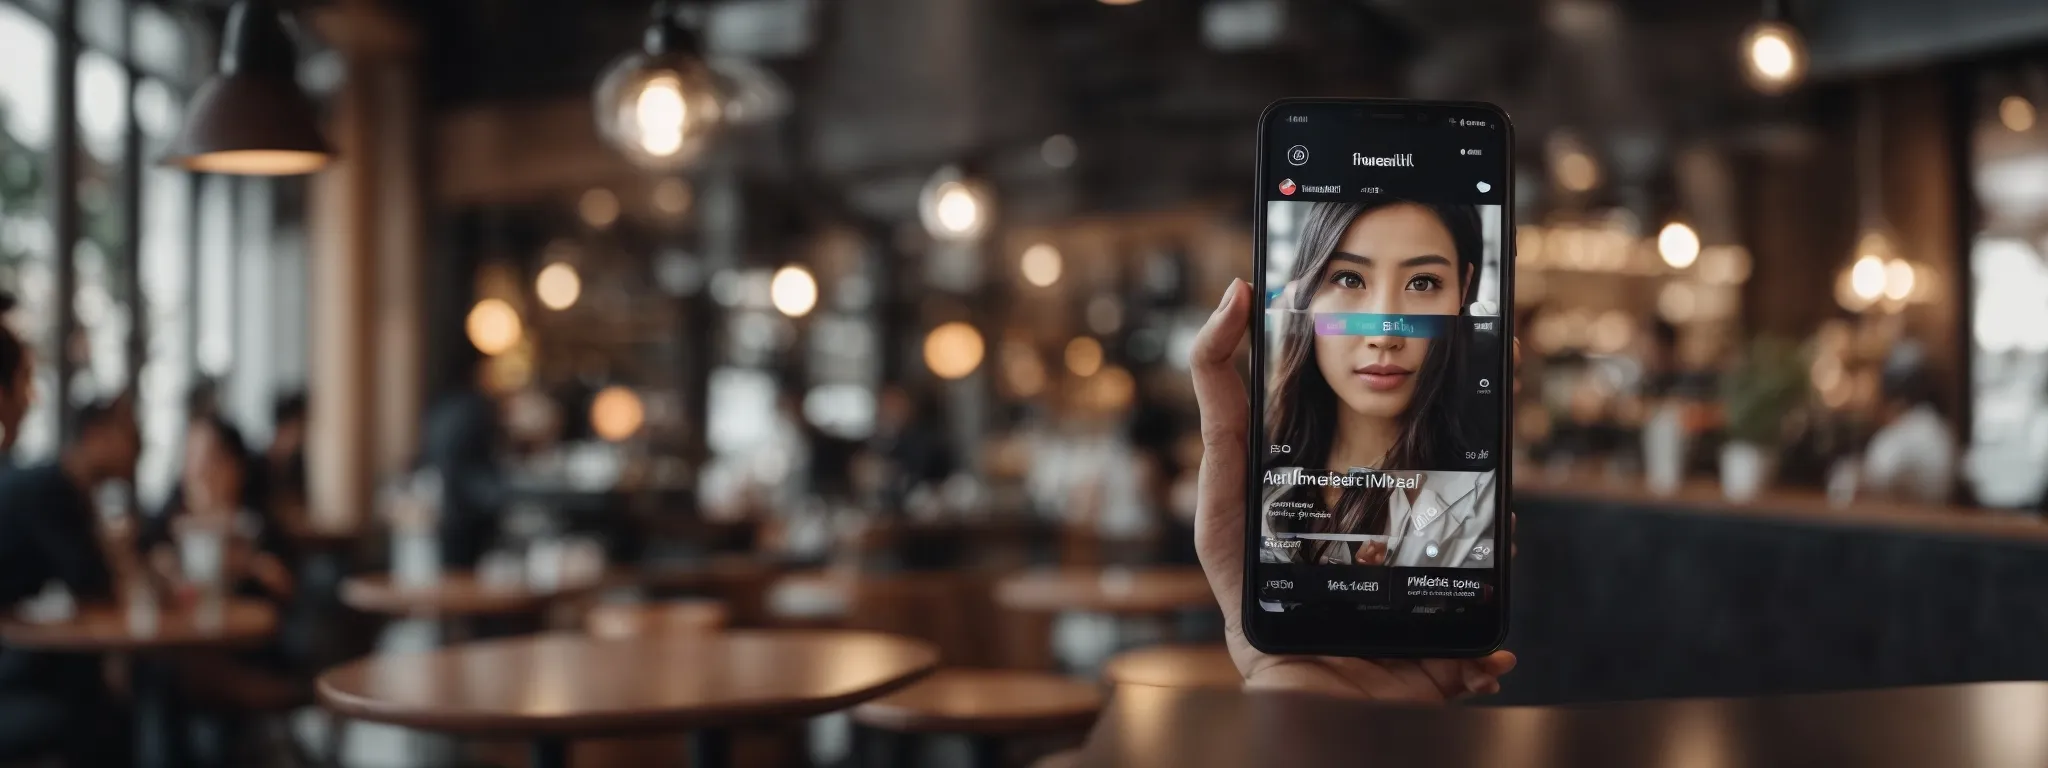 a smartphone displaying a social media influencer's profile with visible metrics is held against a blurred background of a bustling café where potential brand partnerships might converge.